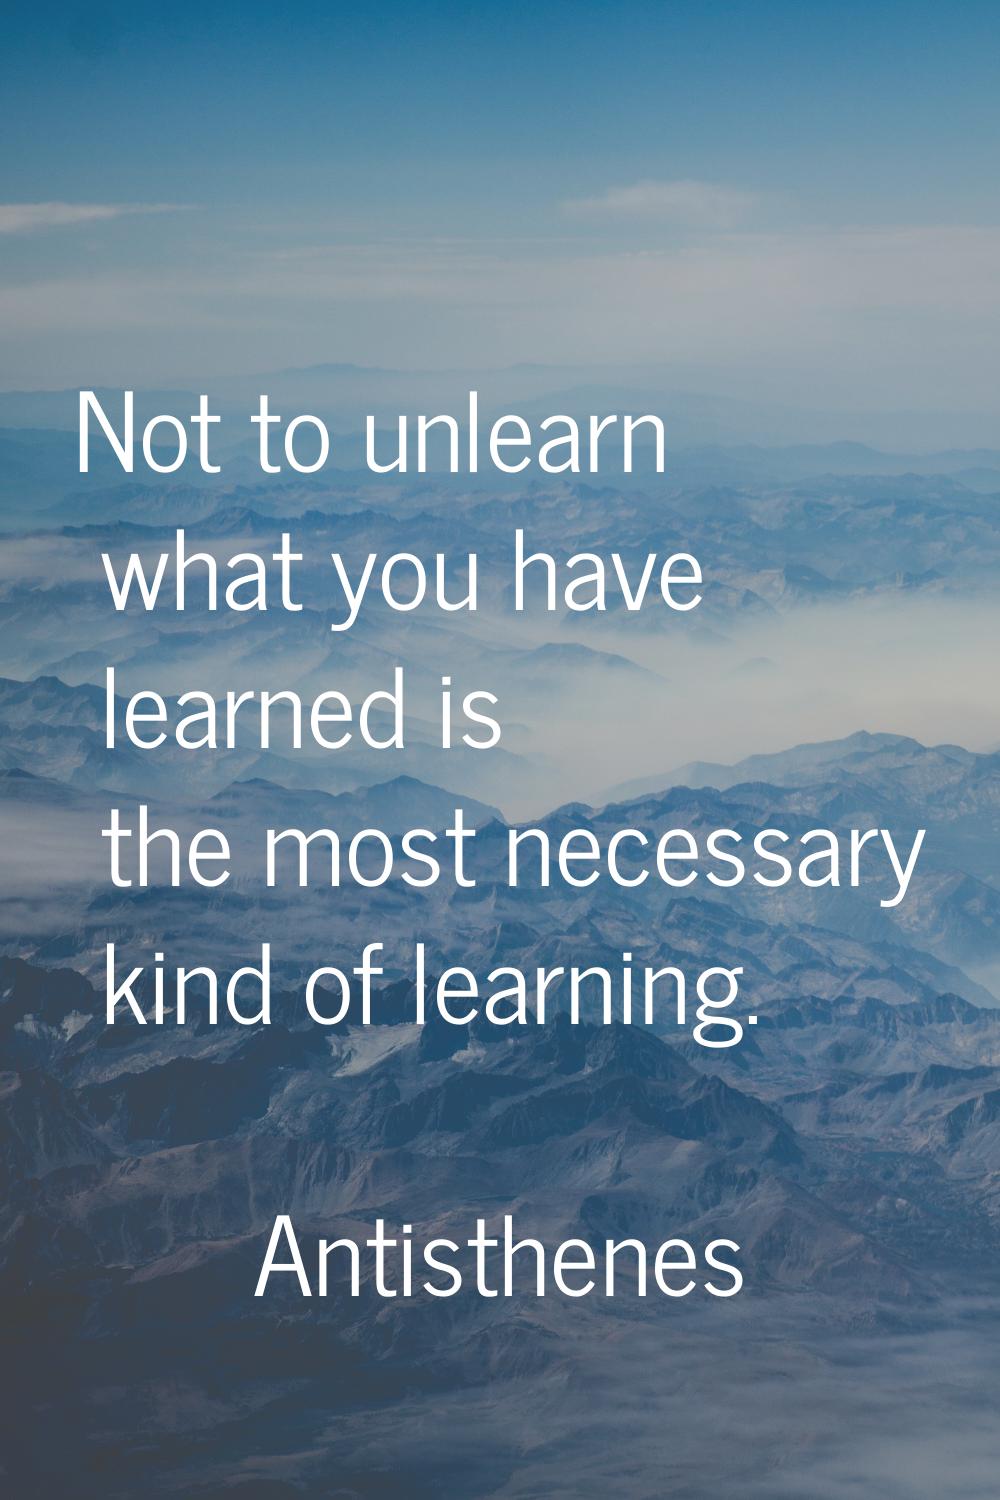 Not to unlearn what you have learned is the most necessary kind of learning.